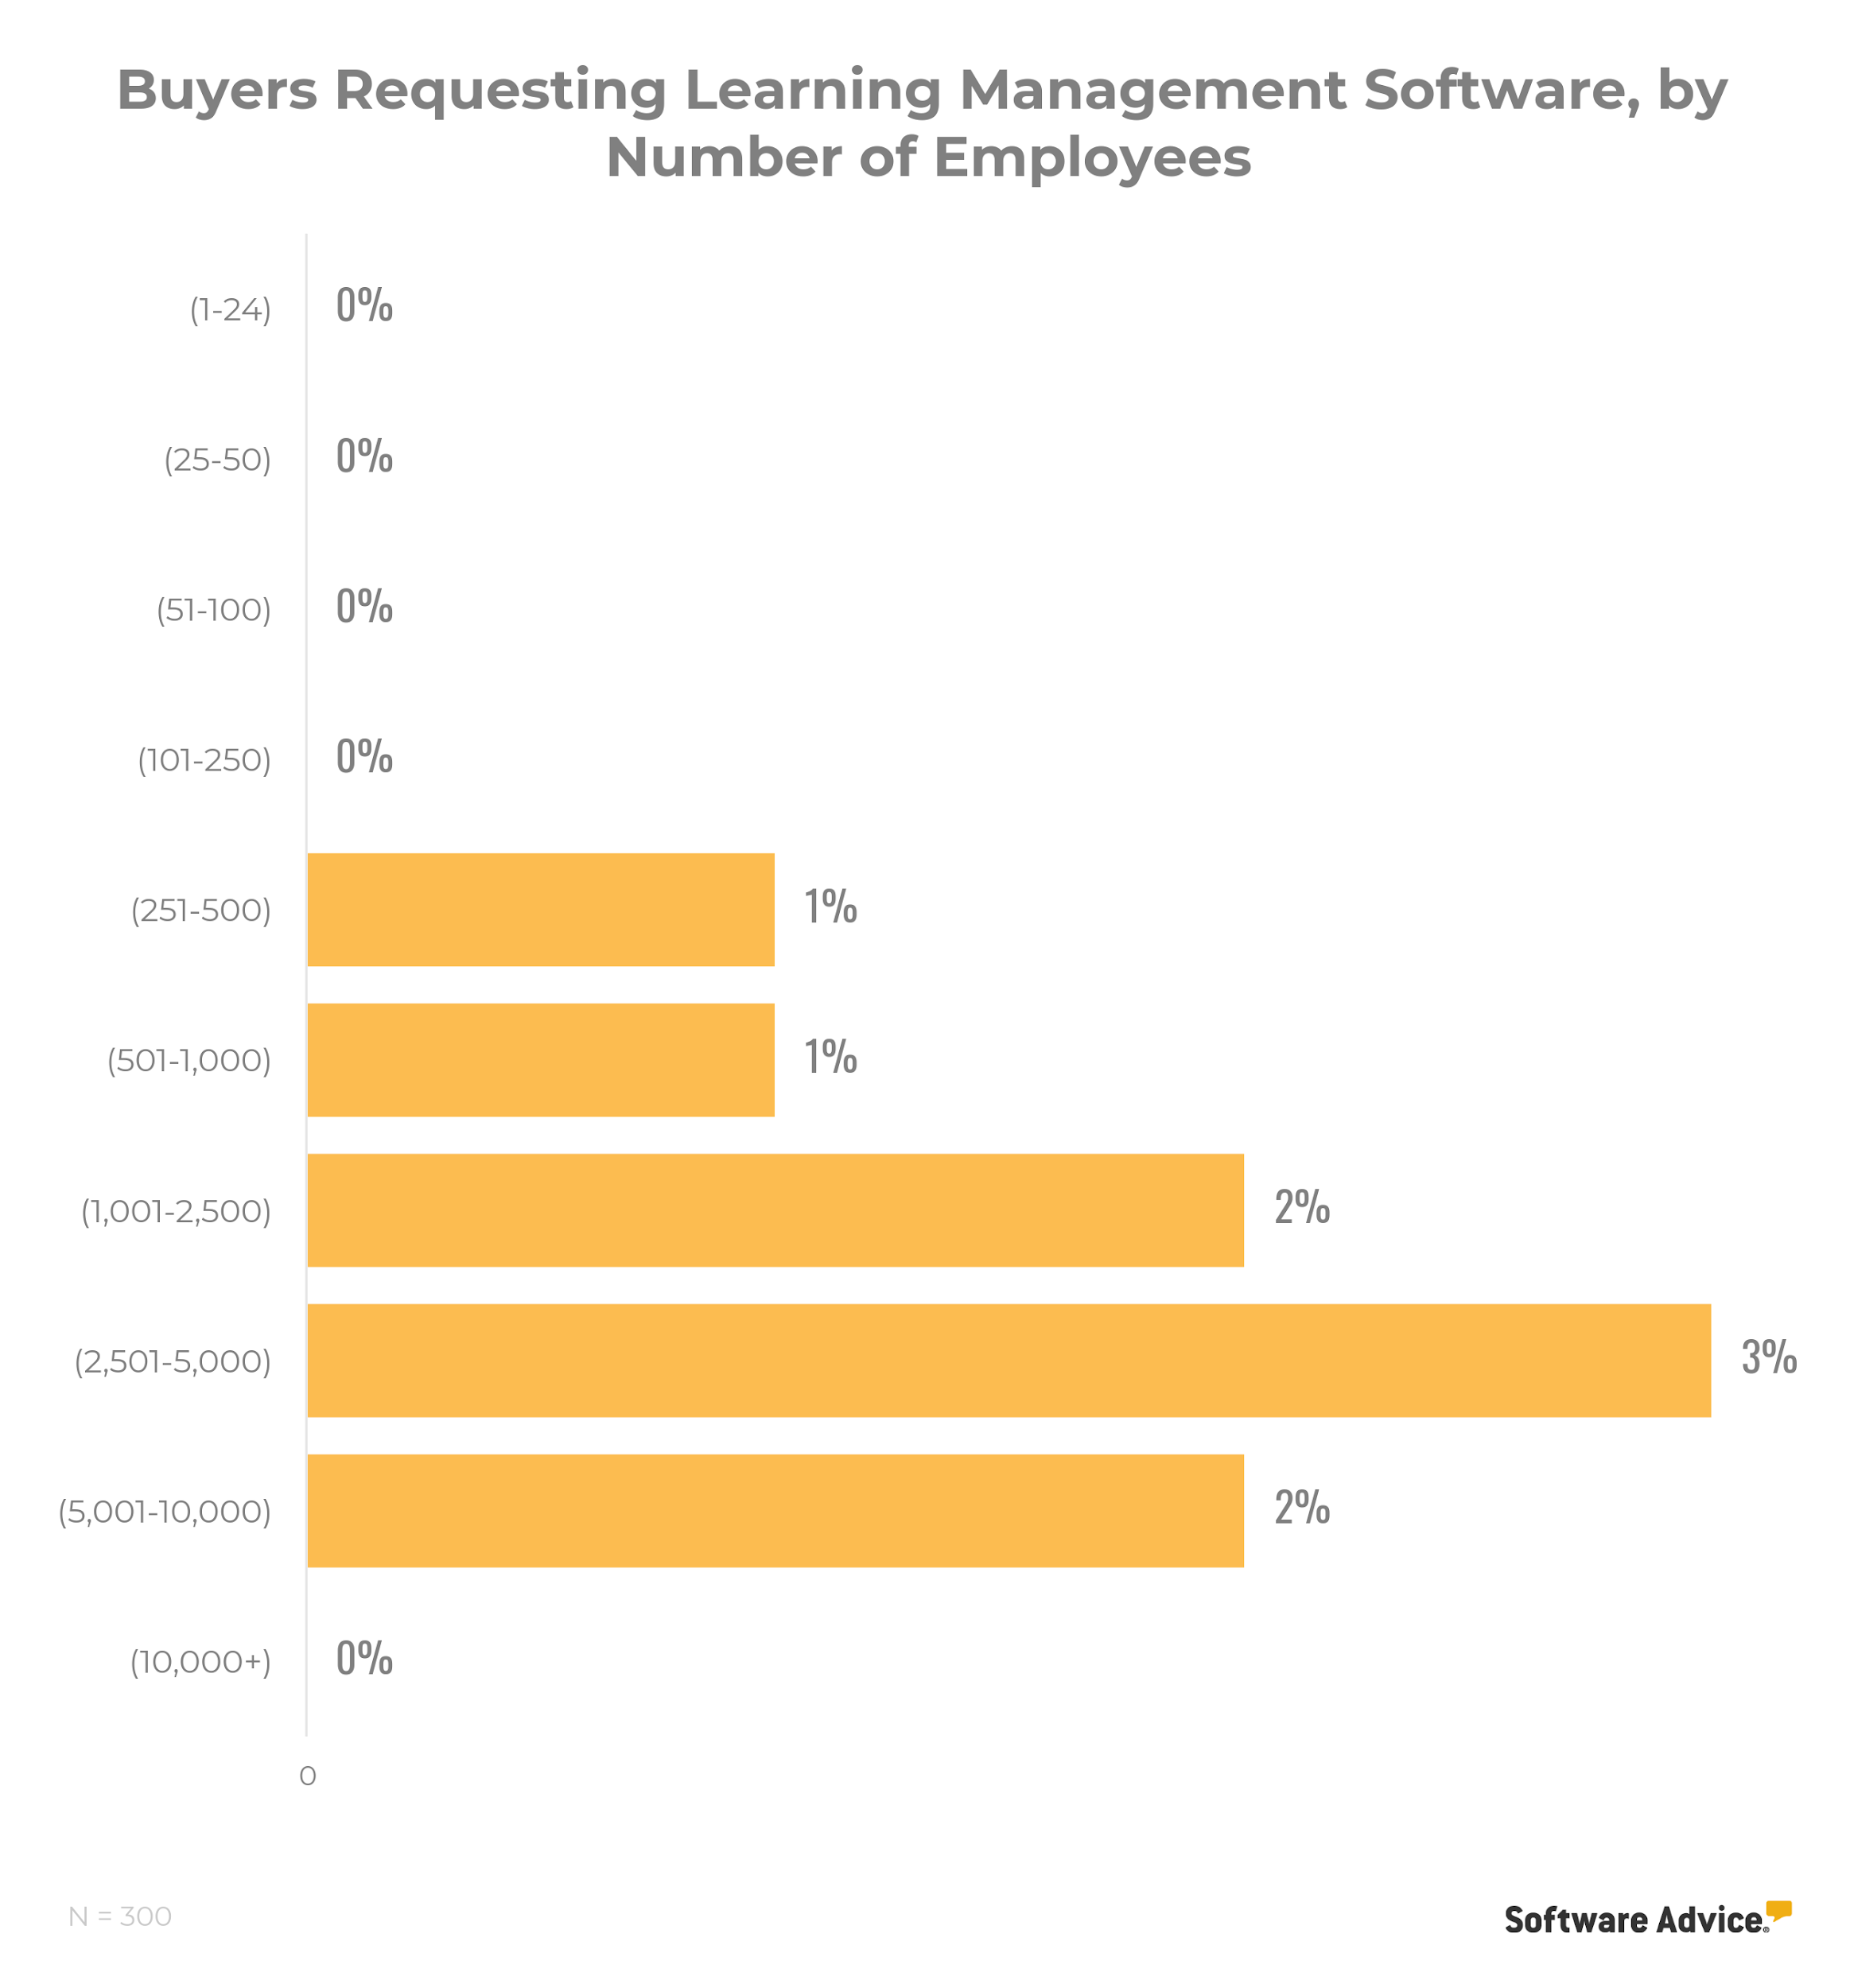 chart-showing-that-purchases-of-LMS-tools-only-begin-when-businesses-have-251-to-10,000-employees—and-even-then,-very-few-buyers-indicated-an-interest-in-learning-management-functionality